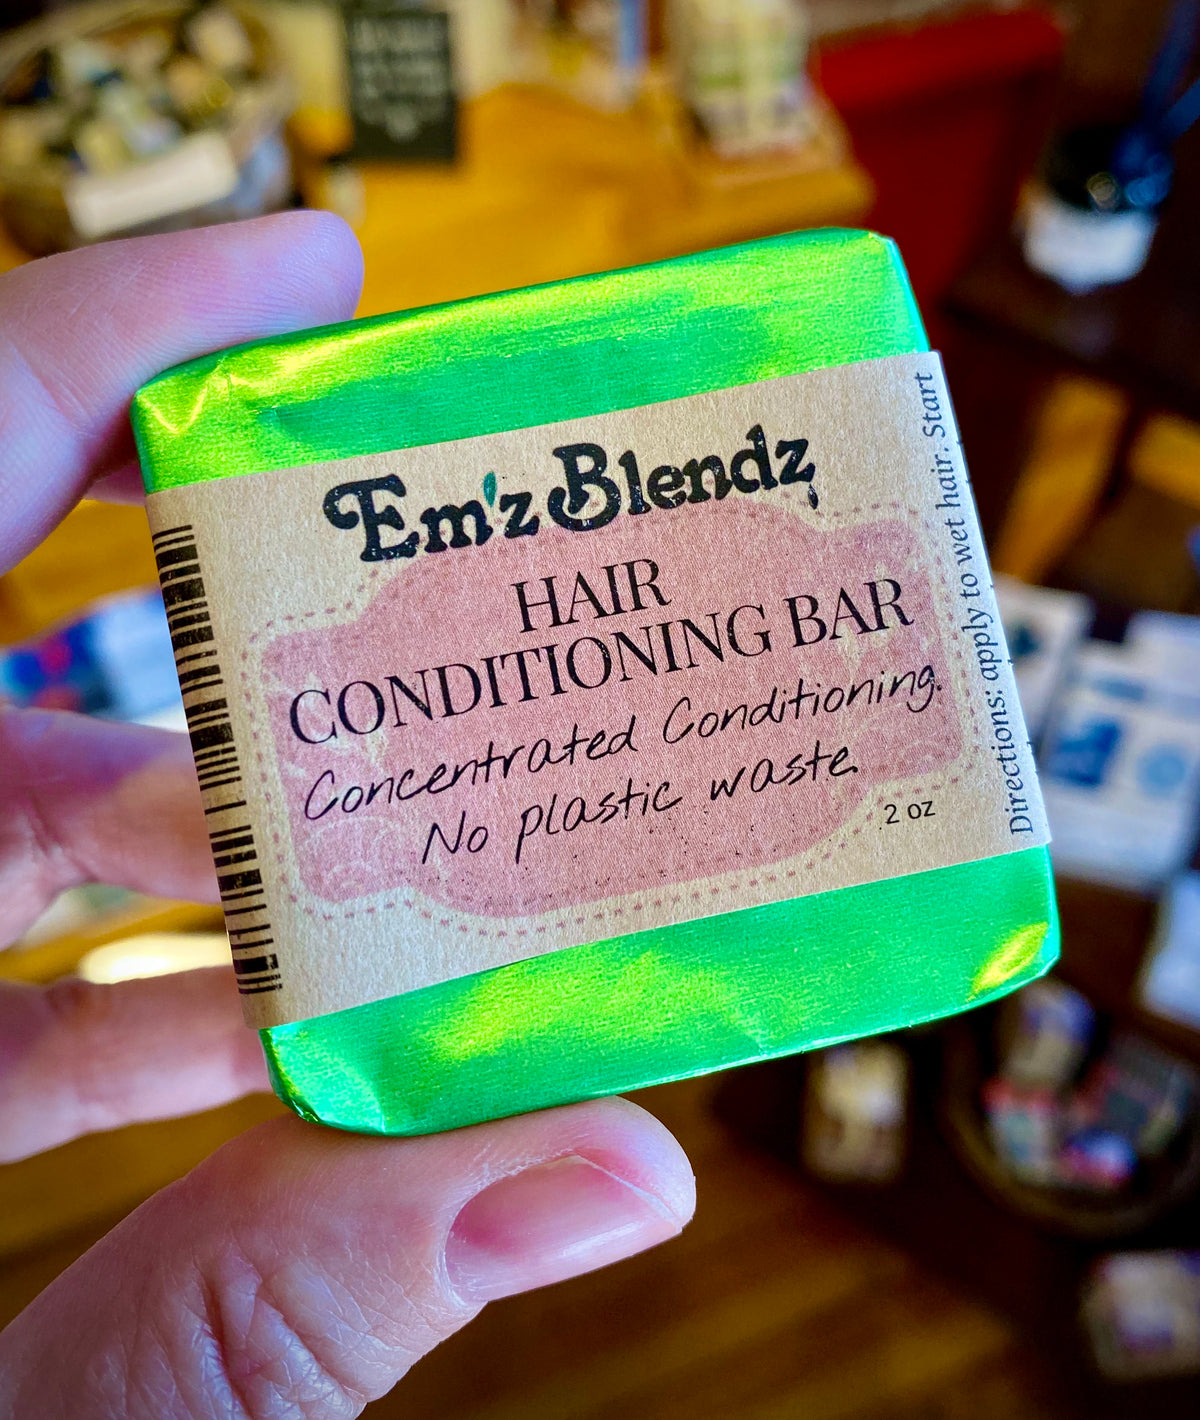 Hair Conditioning Bar | Concentated Contioning | Plastic Free - Emz Blendz